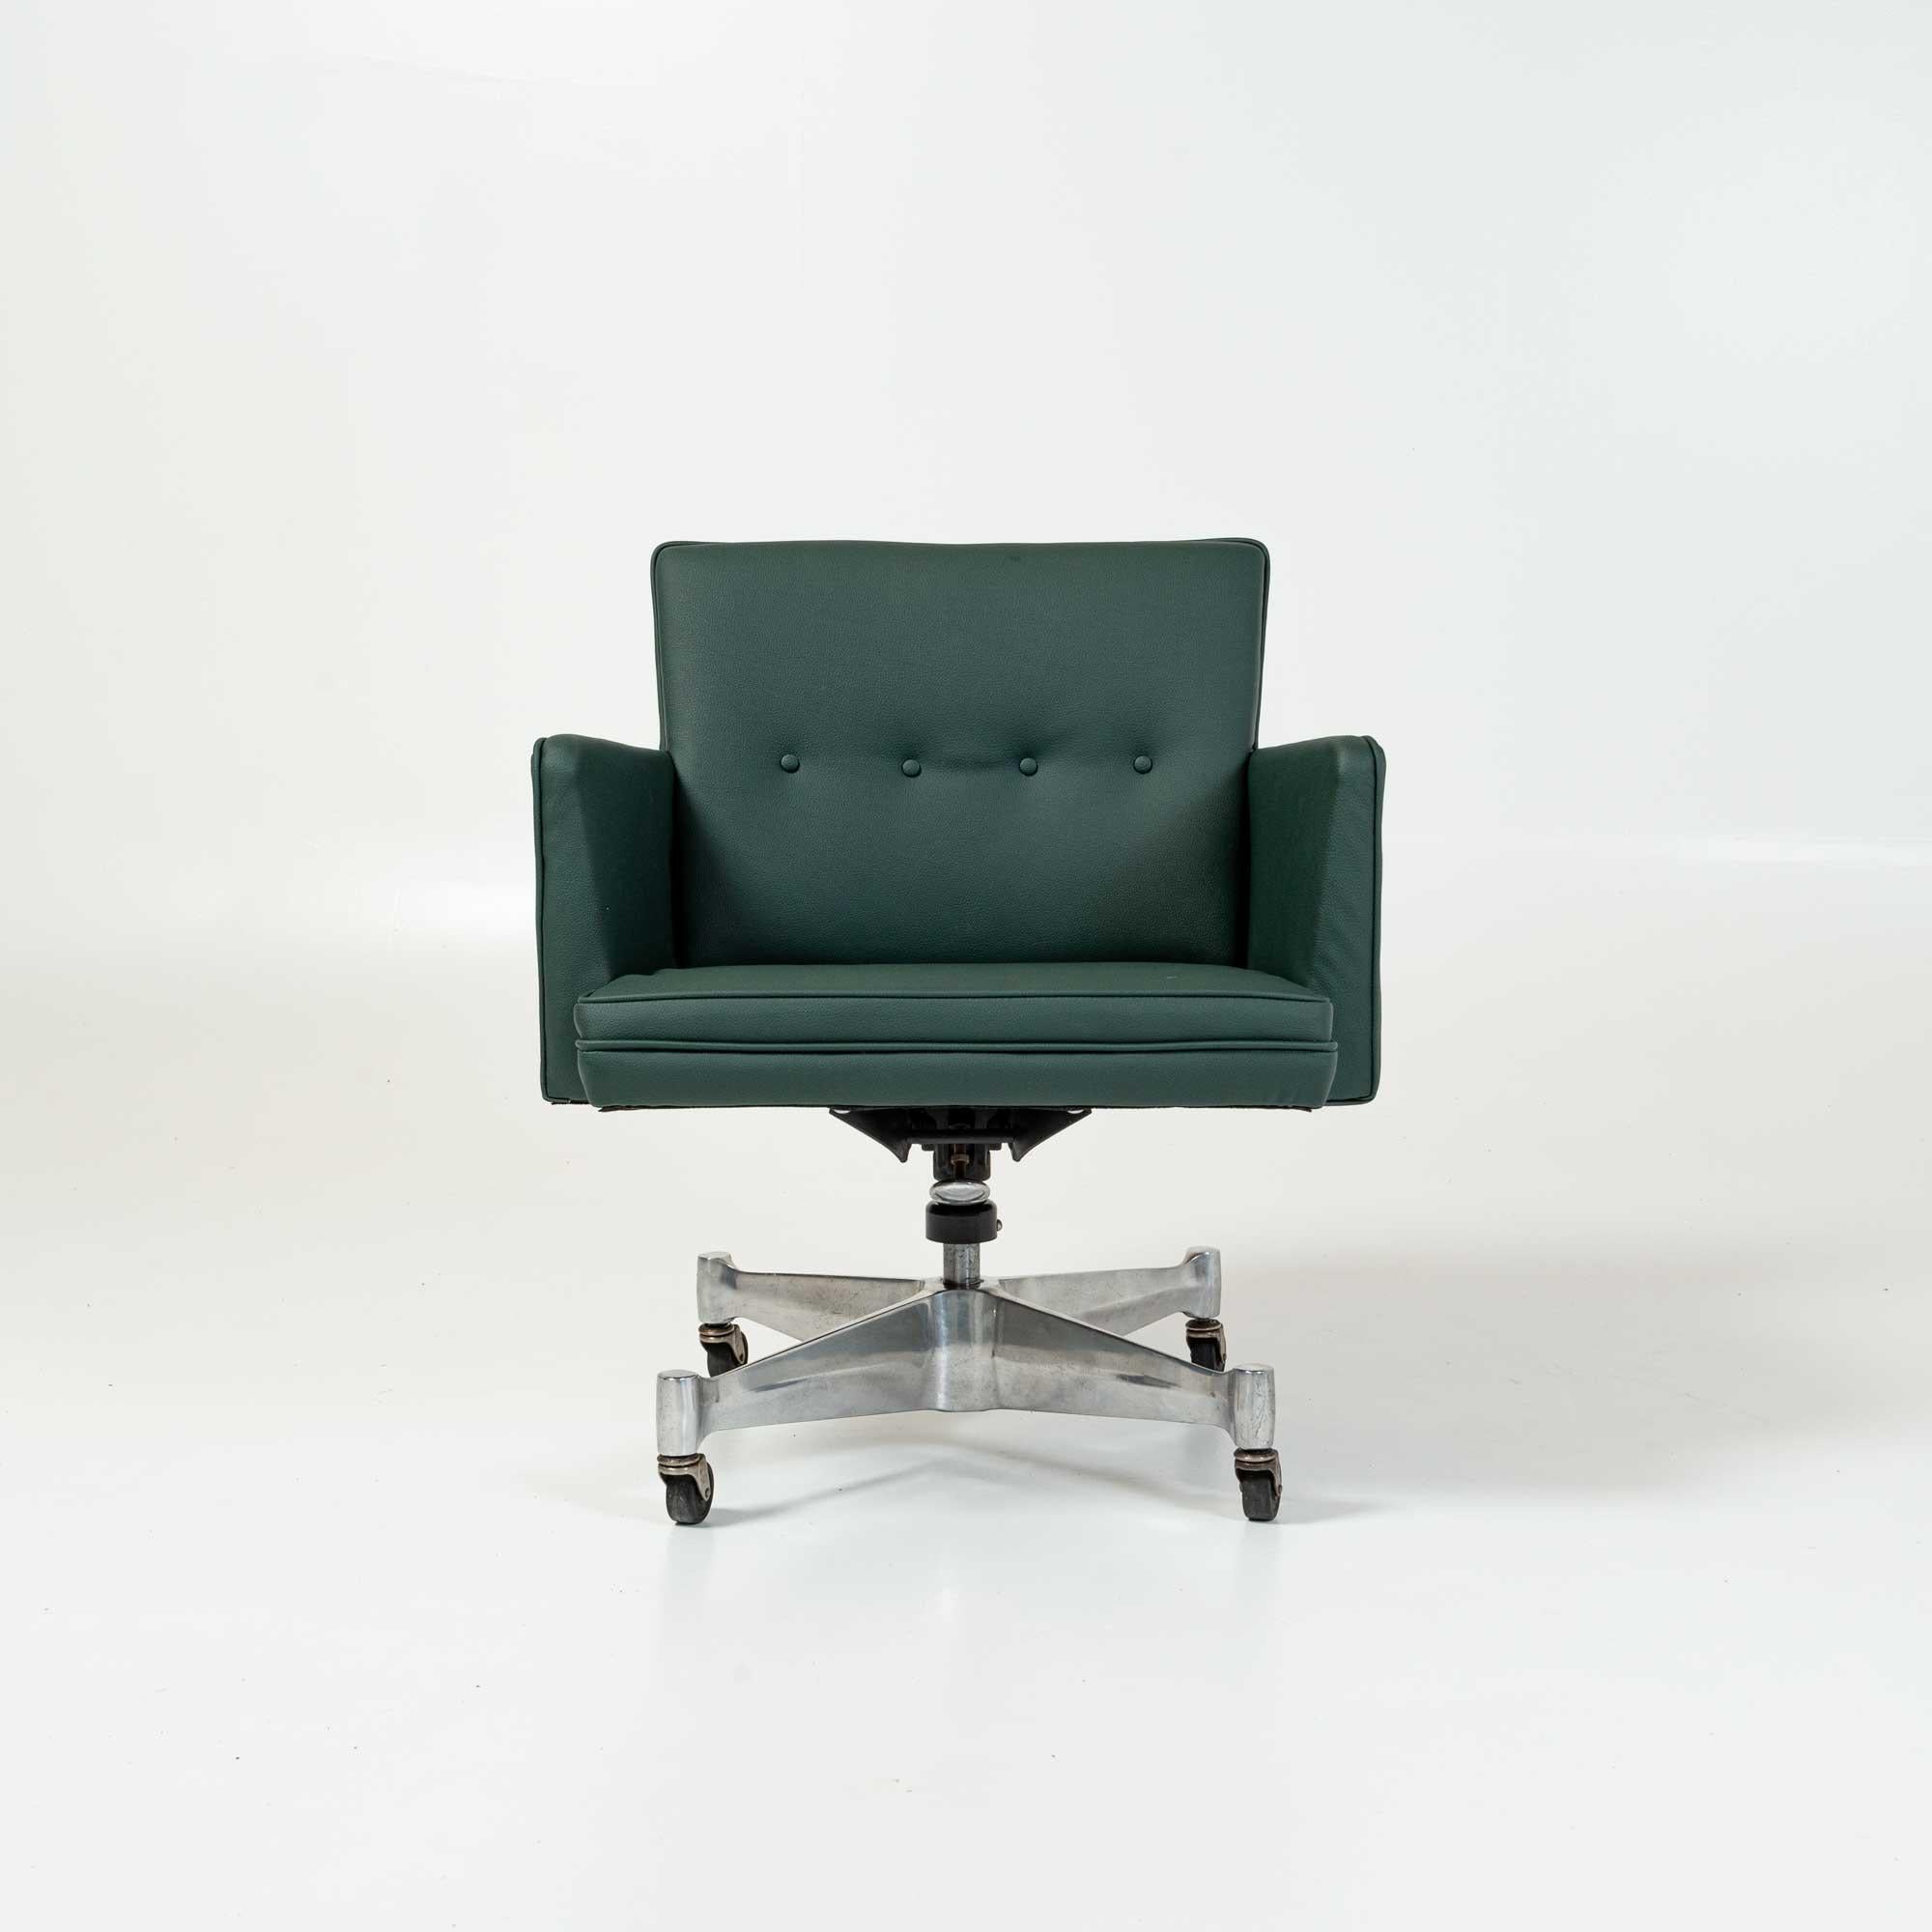 George Nelson & Associate was one the driving force for the revolutionary of Office space furniture in the 50s and 60s. Between 1955 and 1964, the group came up with some of the most iconic design of the Mid-Century Modern era such as the CSS